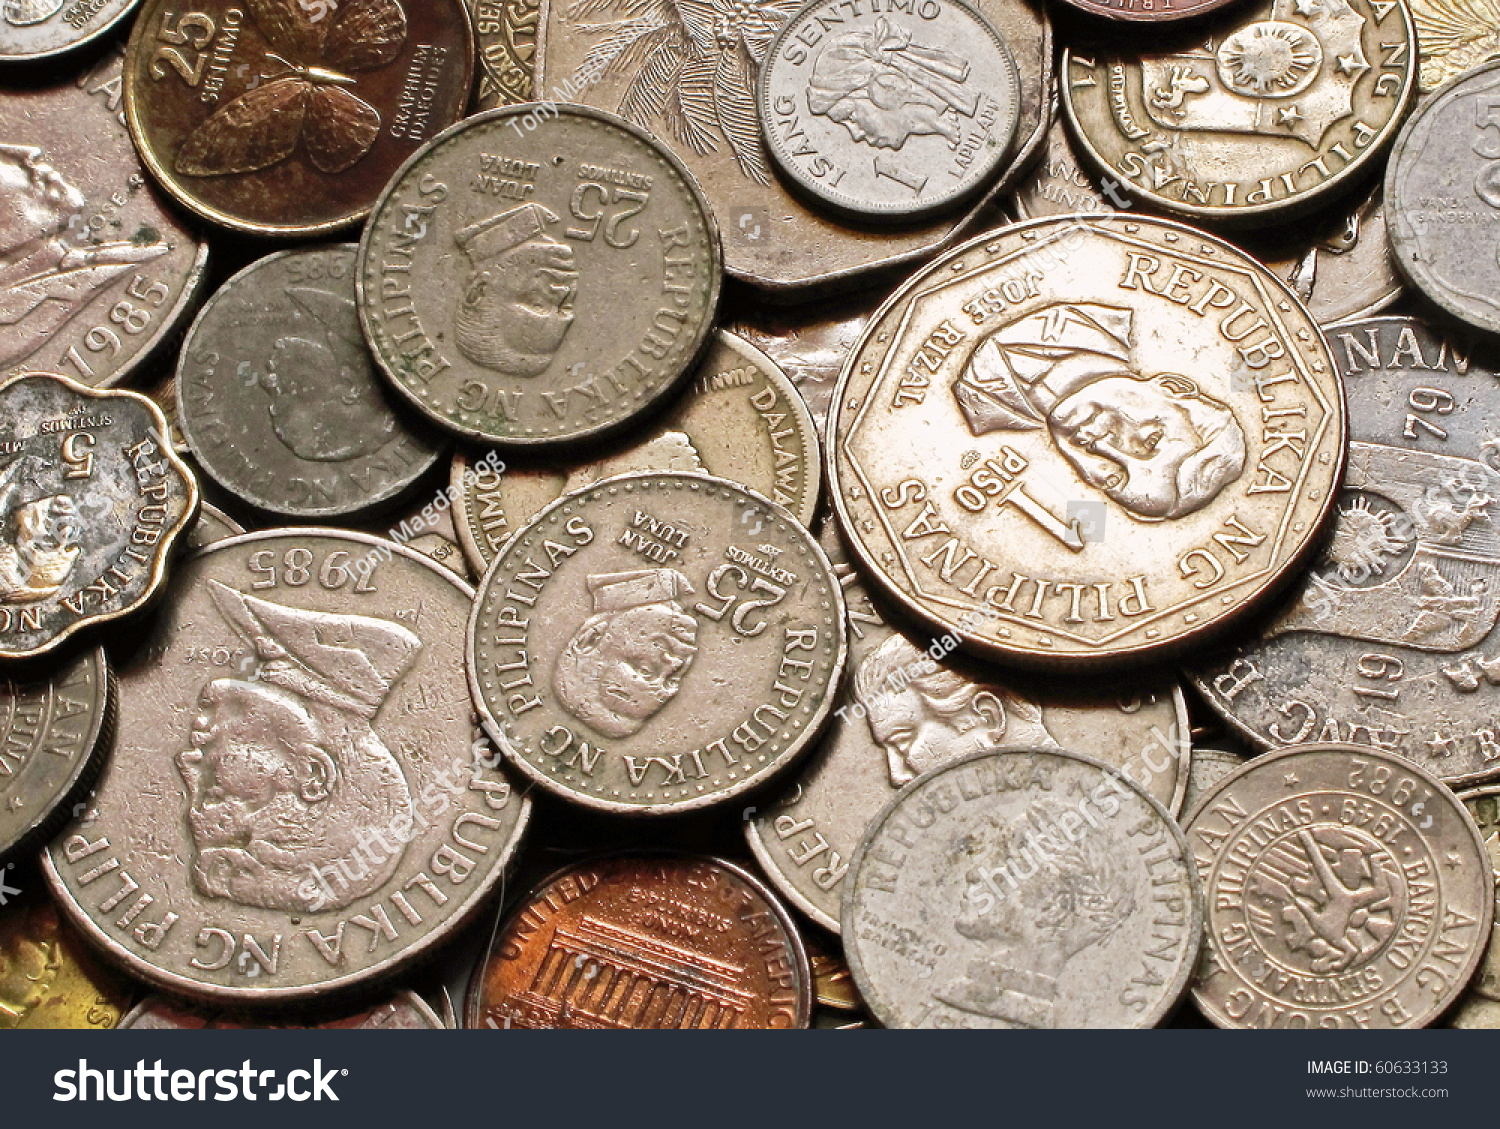 Bunch Of Philippine Coin Currency In Different Era And Denomination ...